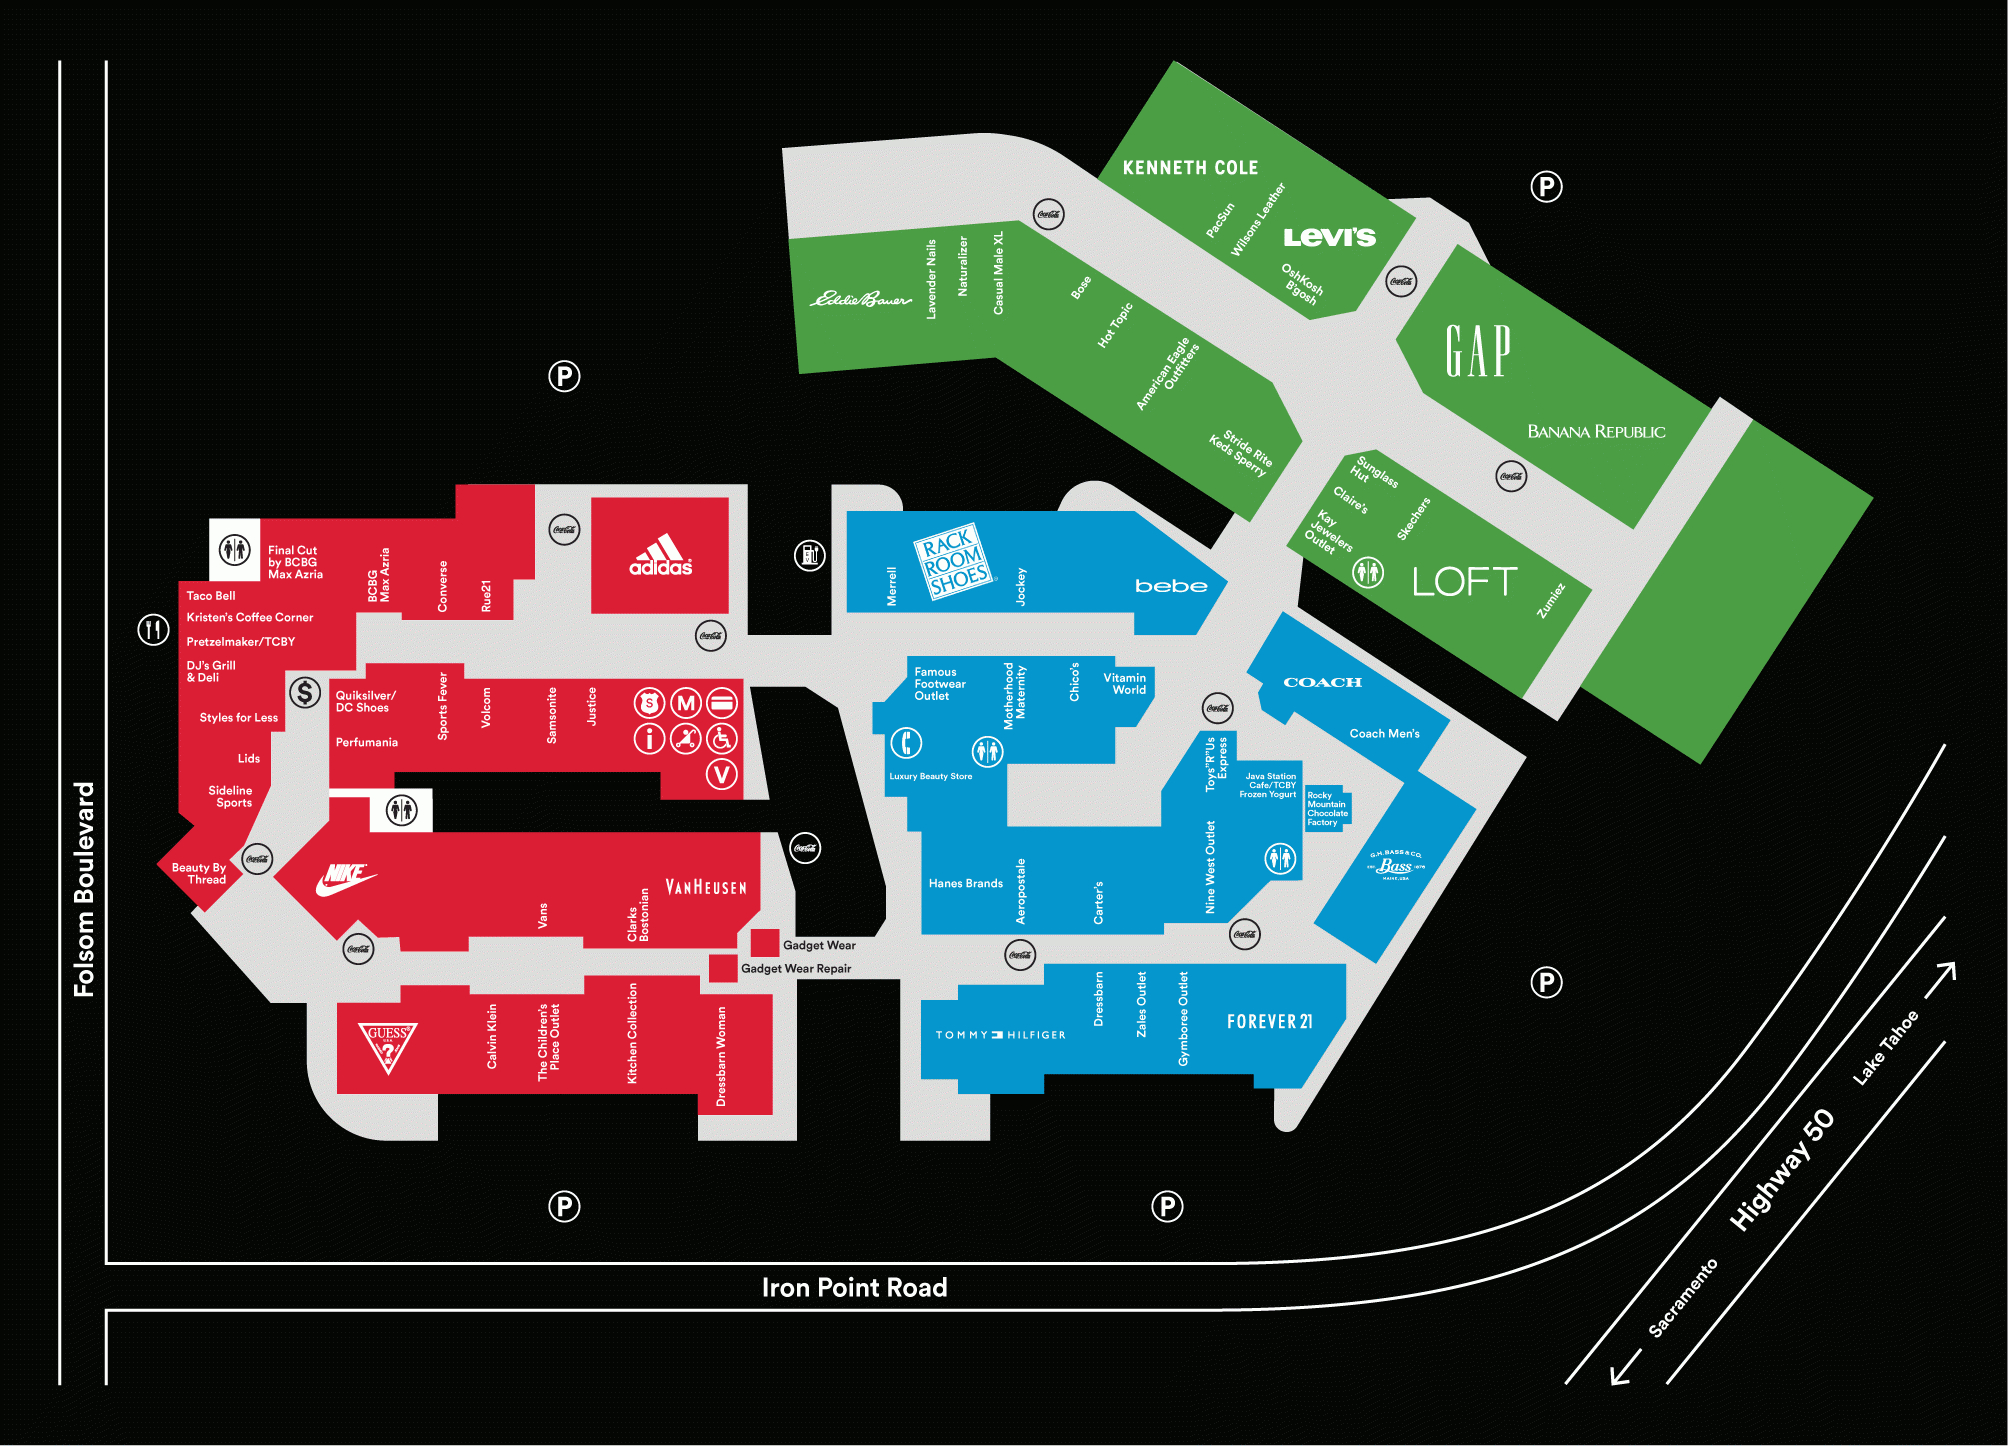 Welcome To Folsom Premium Outlets® - A Shopping Center In Folsom, Ca - Southern California Outlet Malls Map